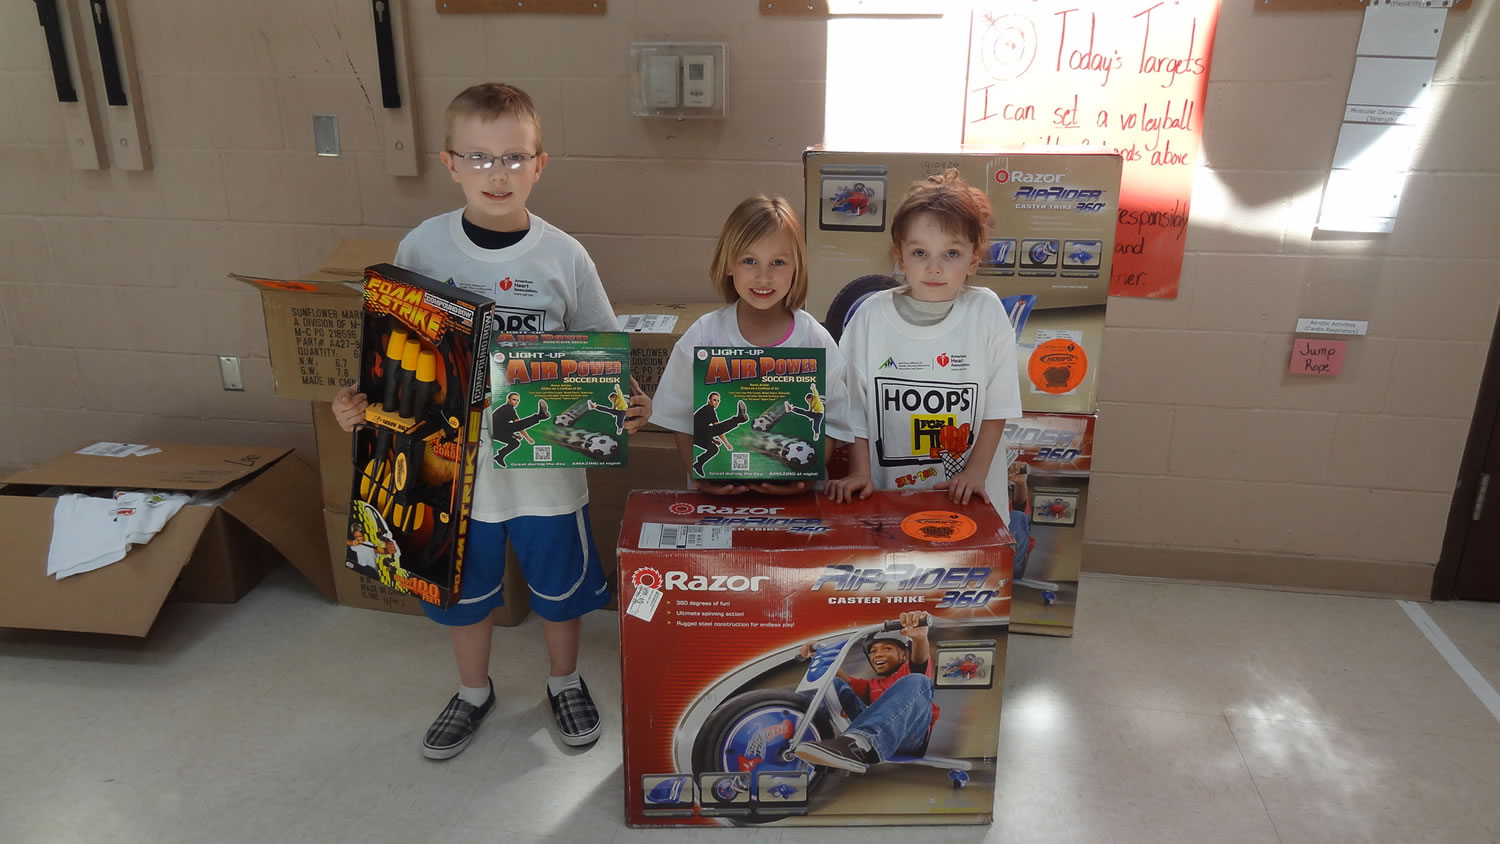 Third-grader Brian Hoff, kindergartner Addysen Case and first-grader Davlin Coburn proudly display the prizes they won for being top fundraisers during the Hoops for Heart event at Lacamas Heights Elementary School. A total of $10,925 was raised for the American Heart Association. Of that total, Coburn was the top fundraiser at $1,205.